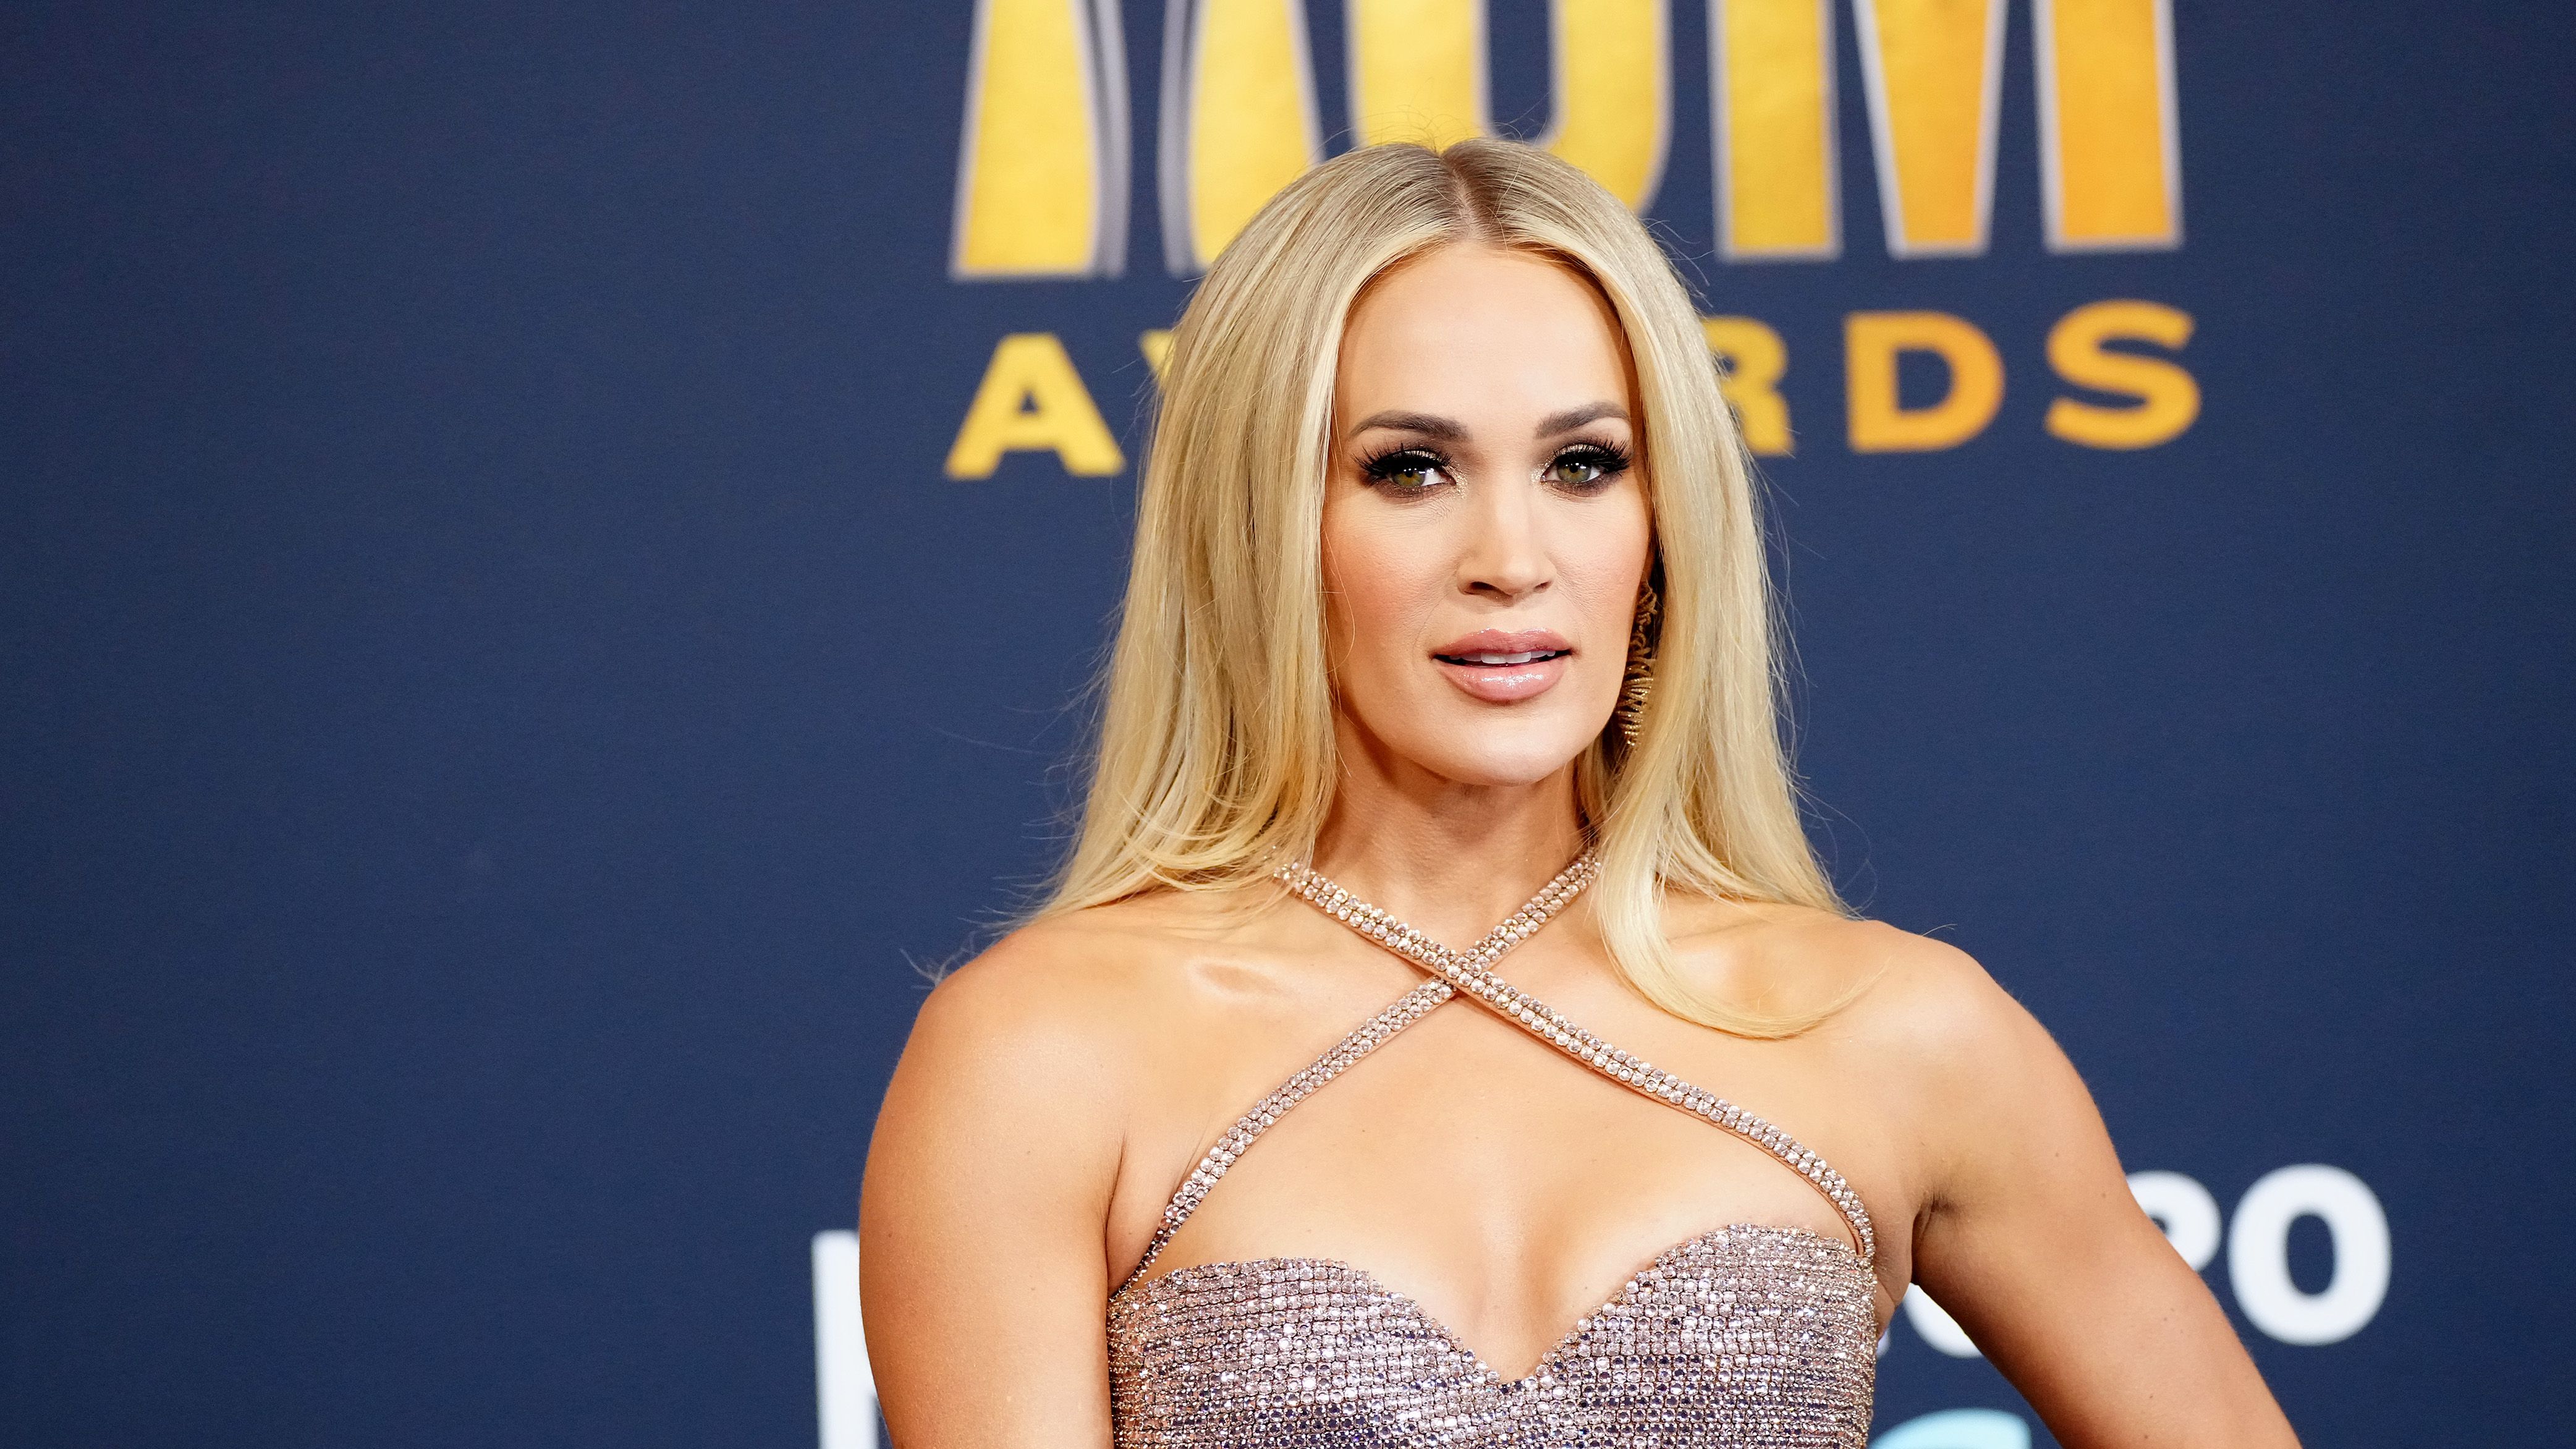 Longtime CMA Awards host Carrie Underwood stepping away in 2020